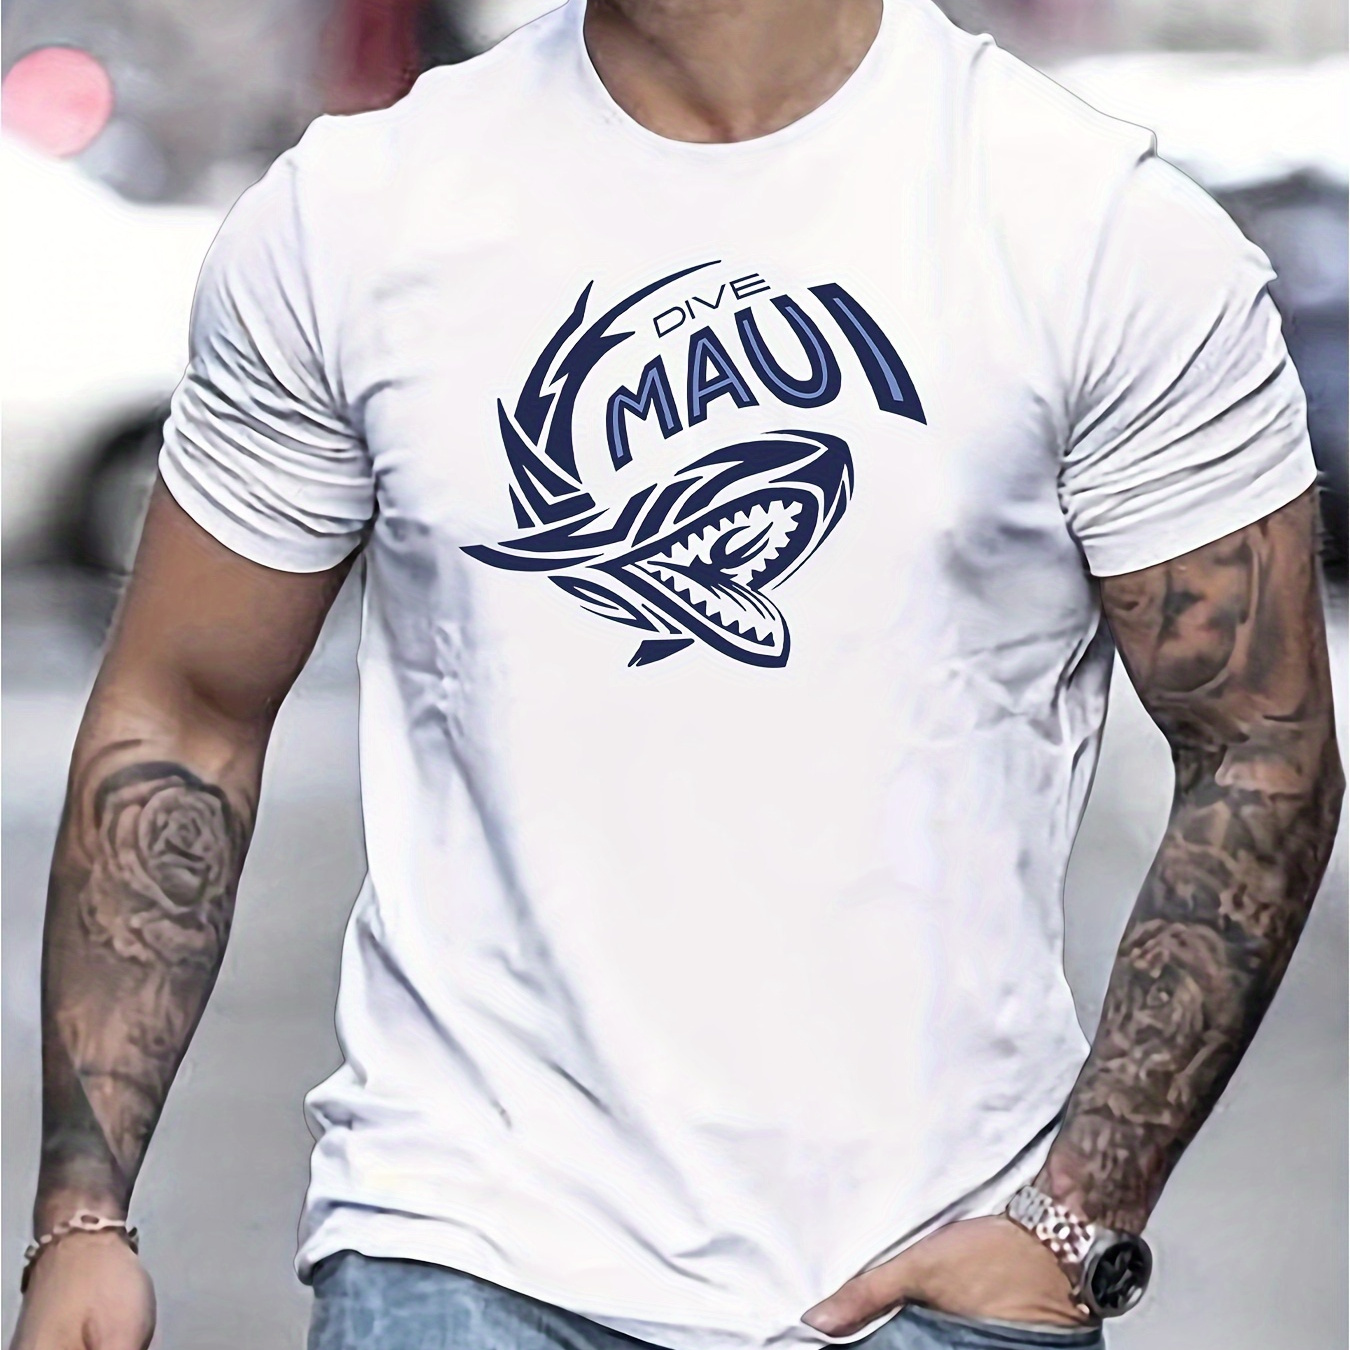 

Men's Maui Print T-shirt, Casual Short Sleeve Crew Neck Tee, Men's Clothing For Outdoor